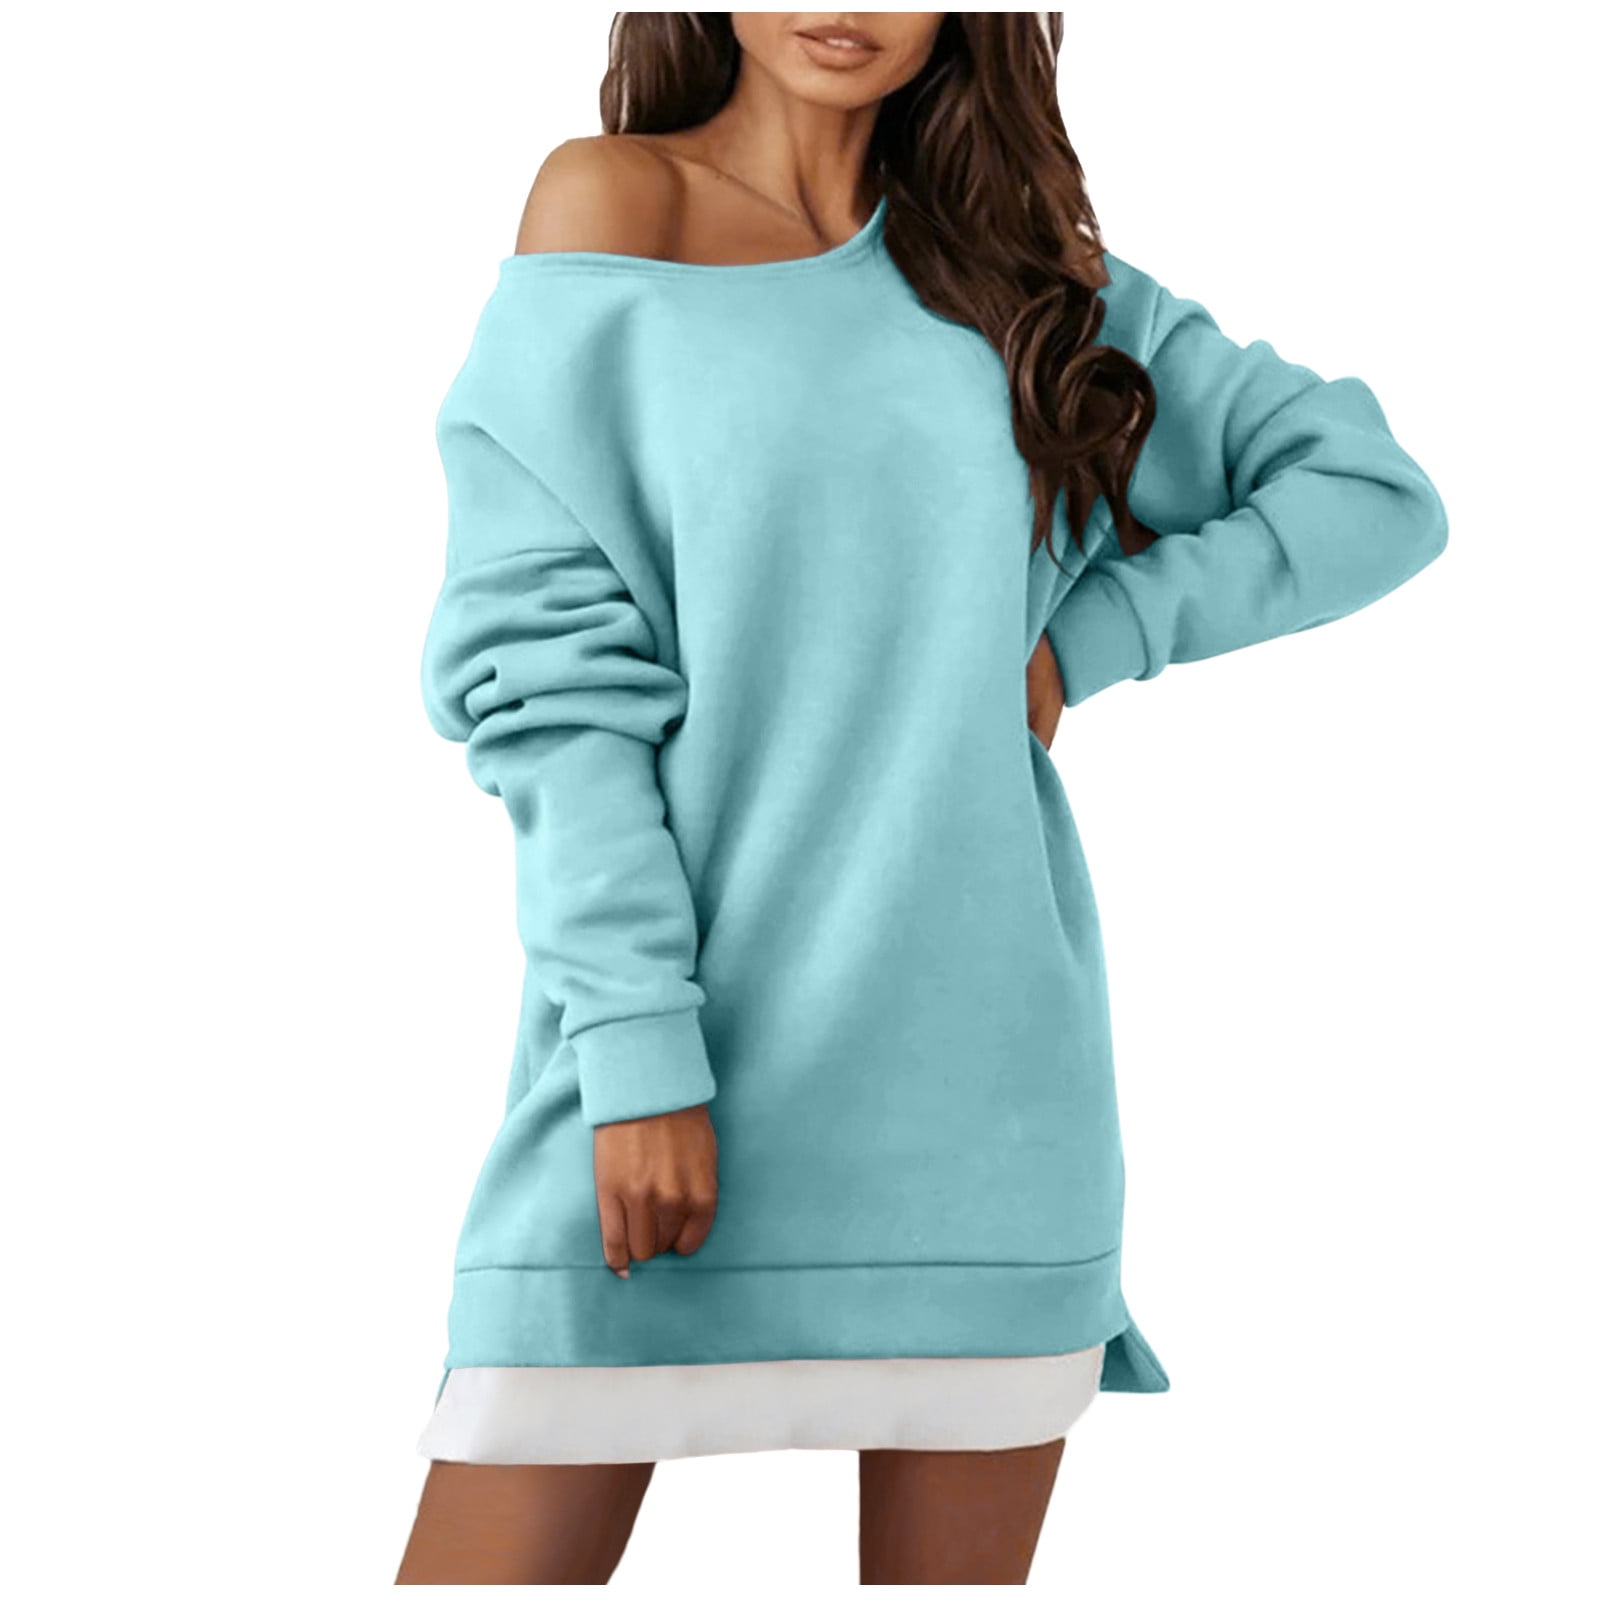 Women's Summer T Shirt Maxi Dress Batwing Sleeve,Cheap Hoodies,Shirt for  Women Under 5 Dollars,Same Day delivery,Preppy Stuff Under 5 Dollars,Liquidation  pallets of Bulk,Sale Items for Women Clothing